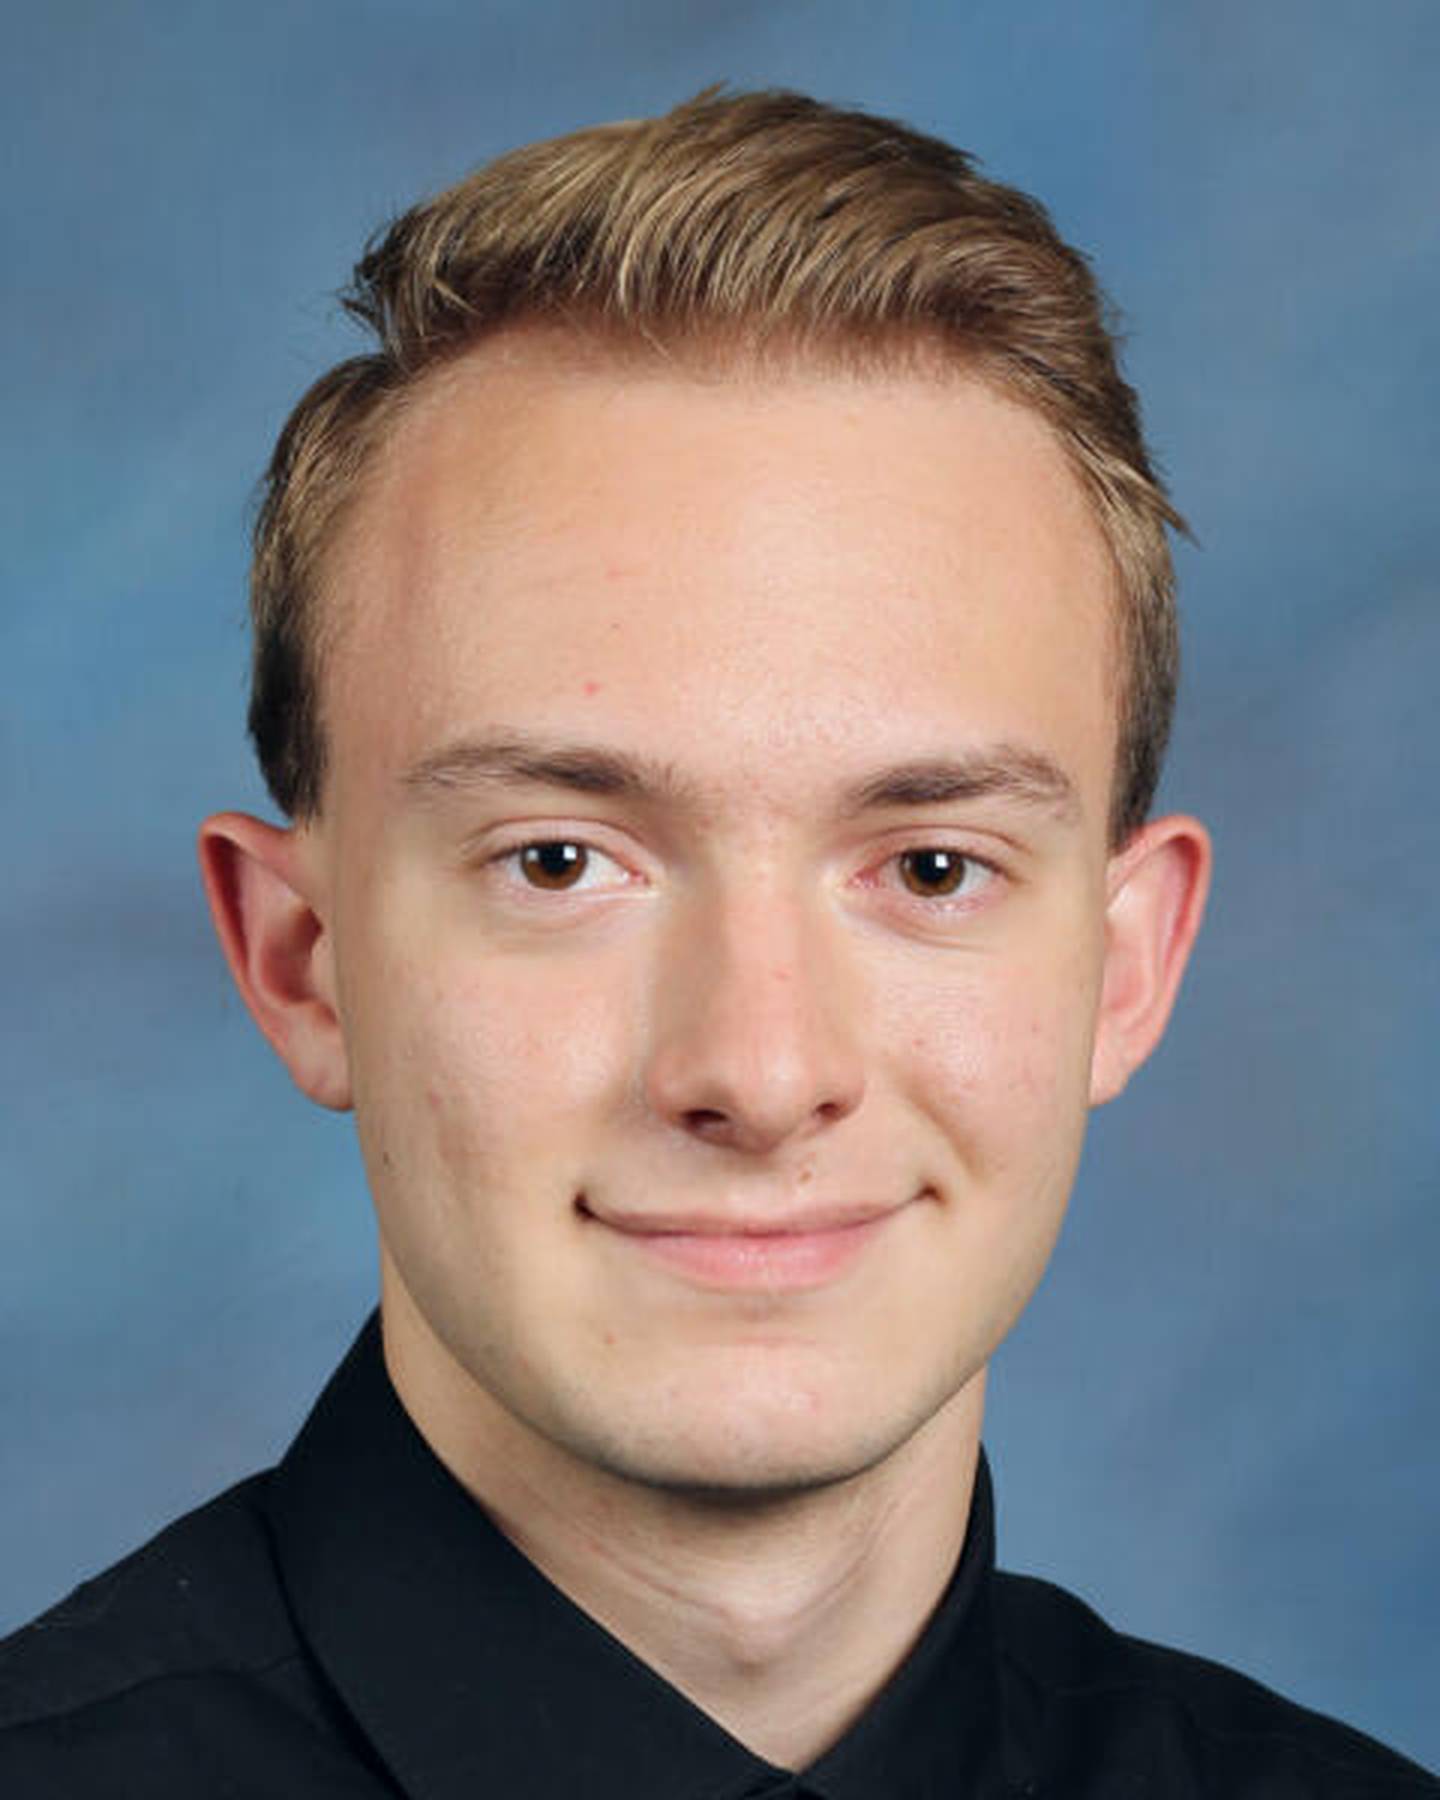 Joliet Catholic Academy named Xander Allgood as a Student of the Month for November 2021.